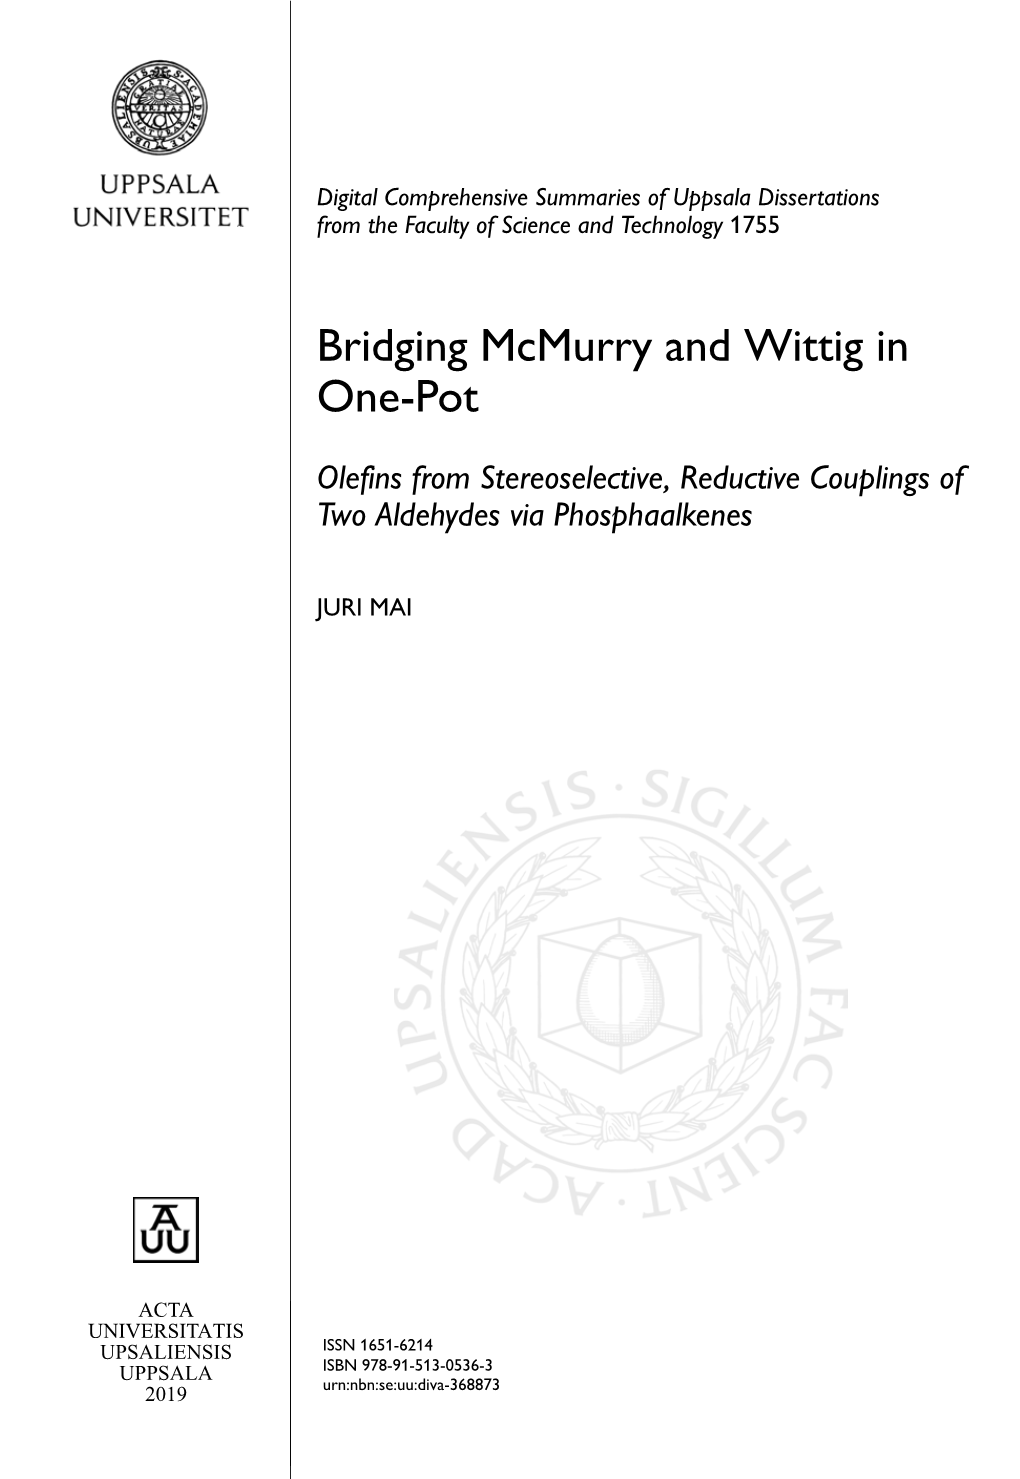 Bridging Mcmurry and Wittig in One-Pot